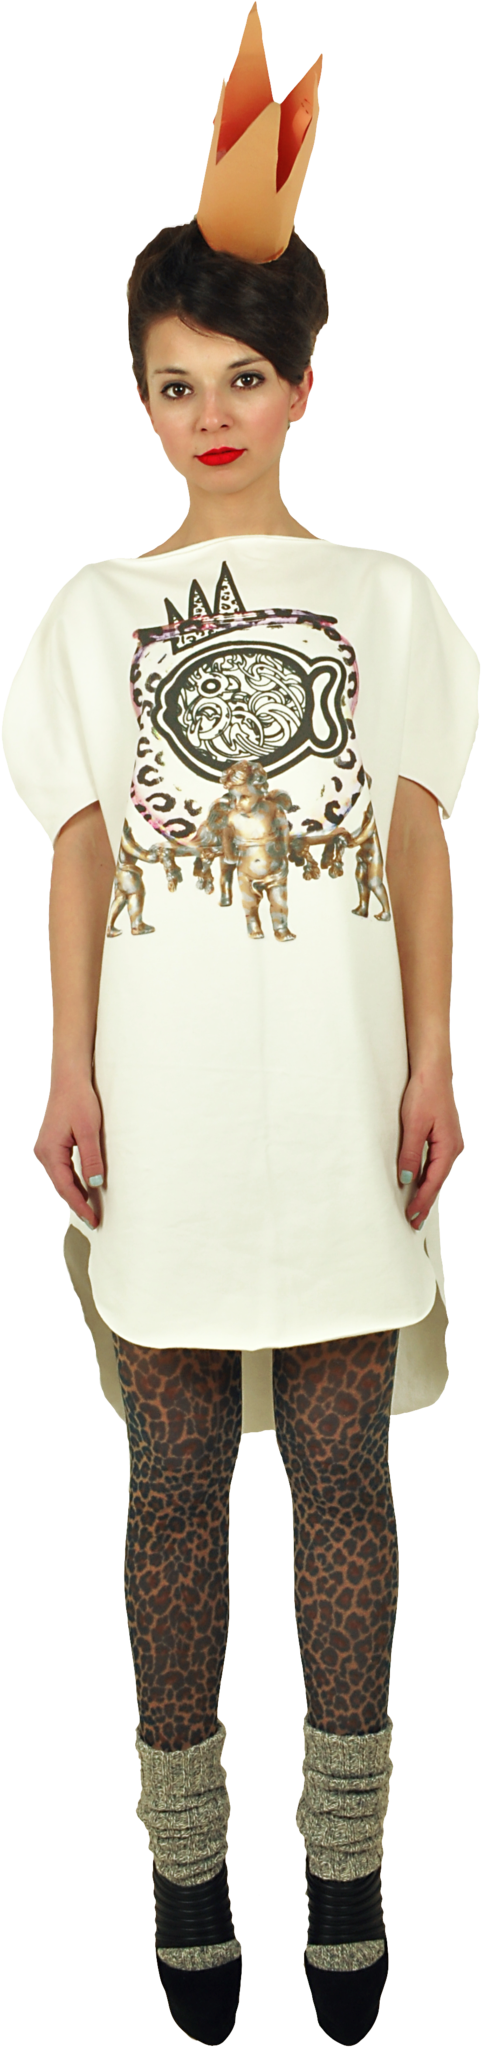 Long Princely T-Shirt "The Gold Digger" in Milk